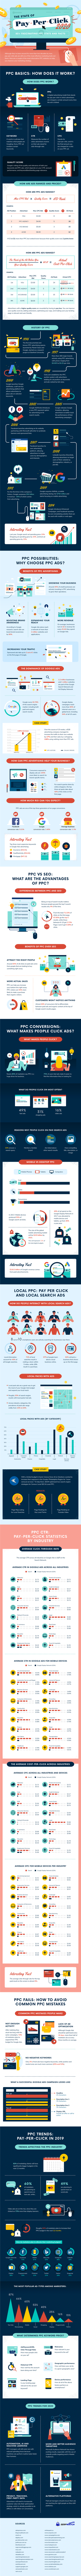 PPC Stats and Marketing Trend for 2019